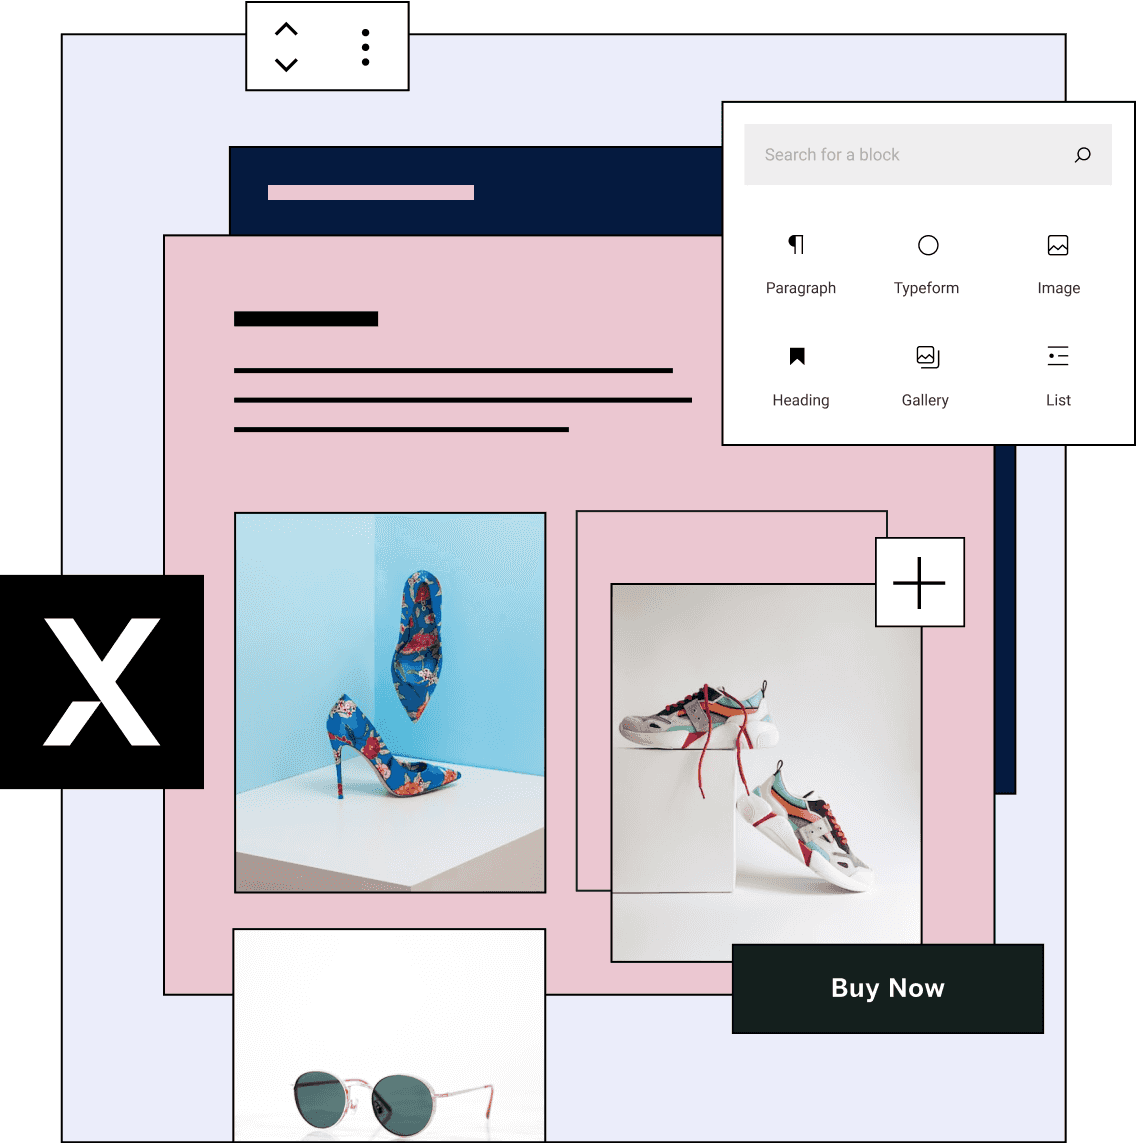 A website page is being built, the page shows high-heeled shoes, sneakers, and sunglasses for sale